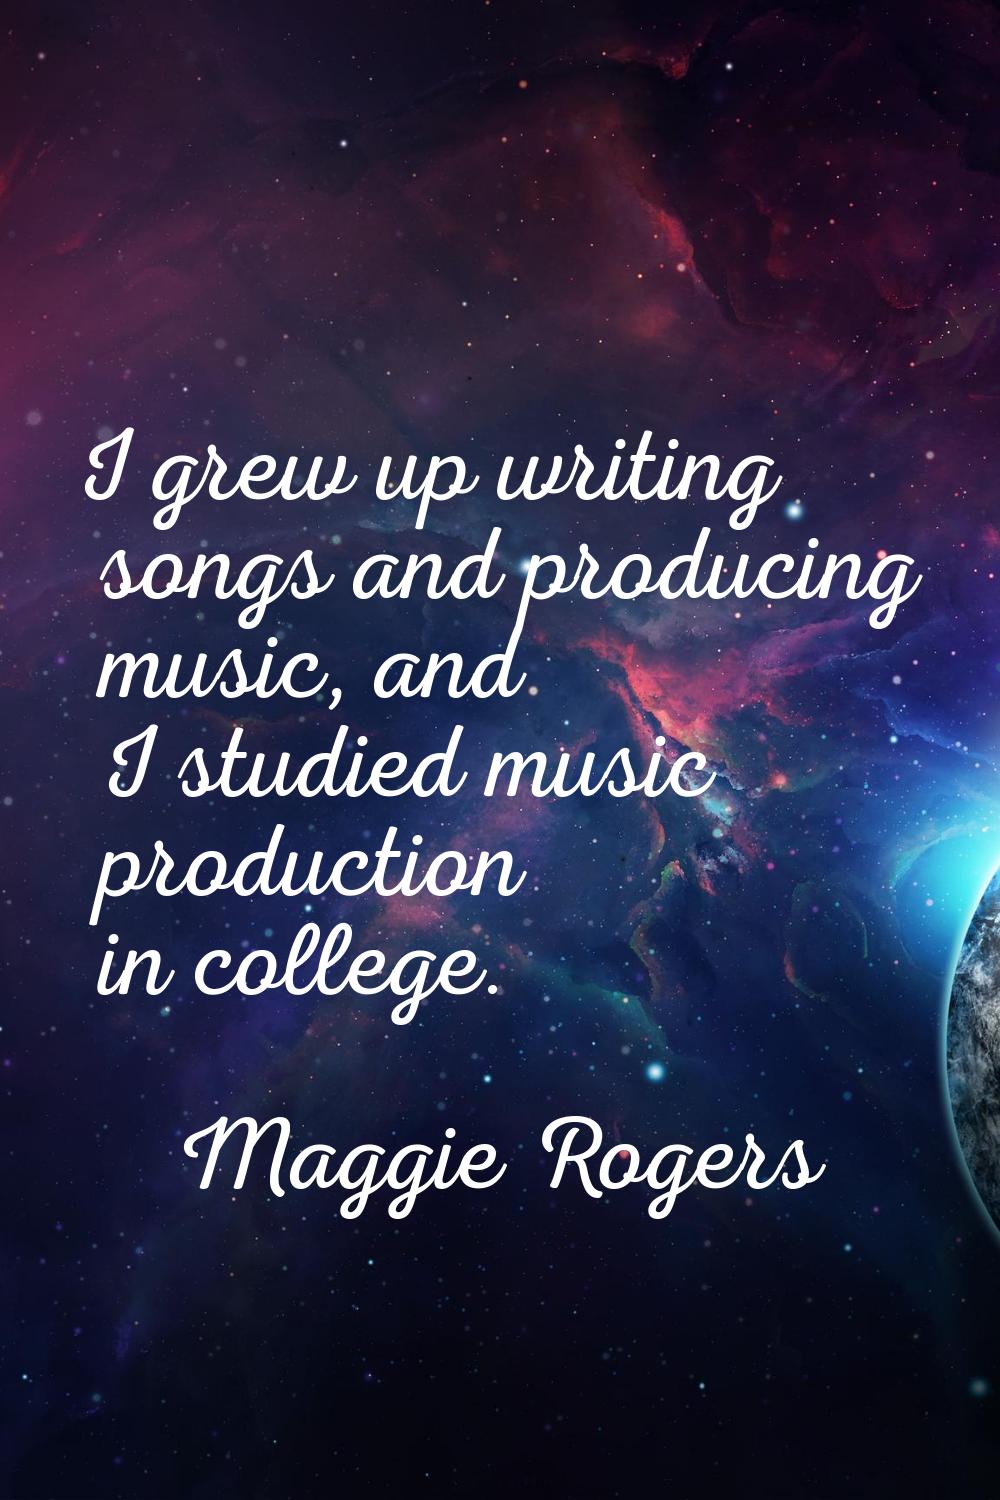 I grew up writing songs and producing music, and I studied music production in college.